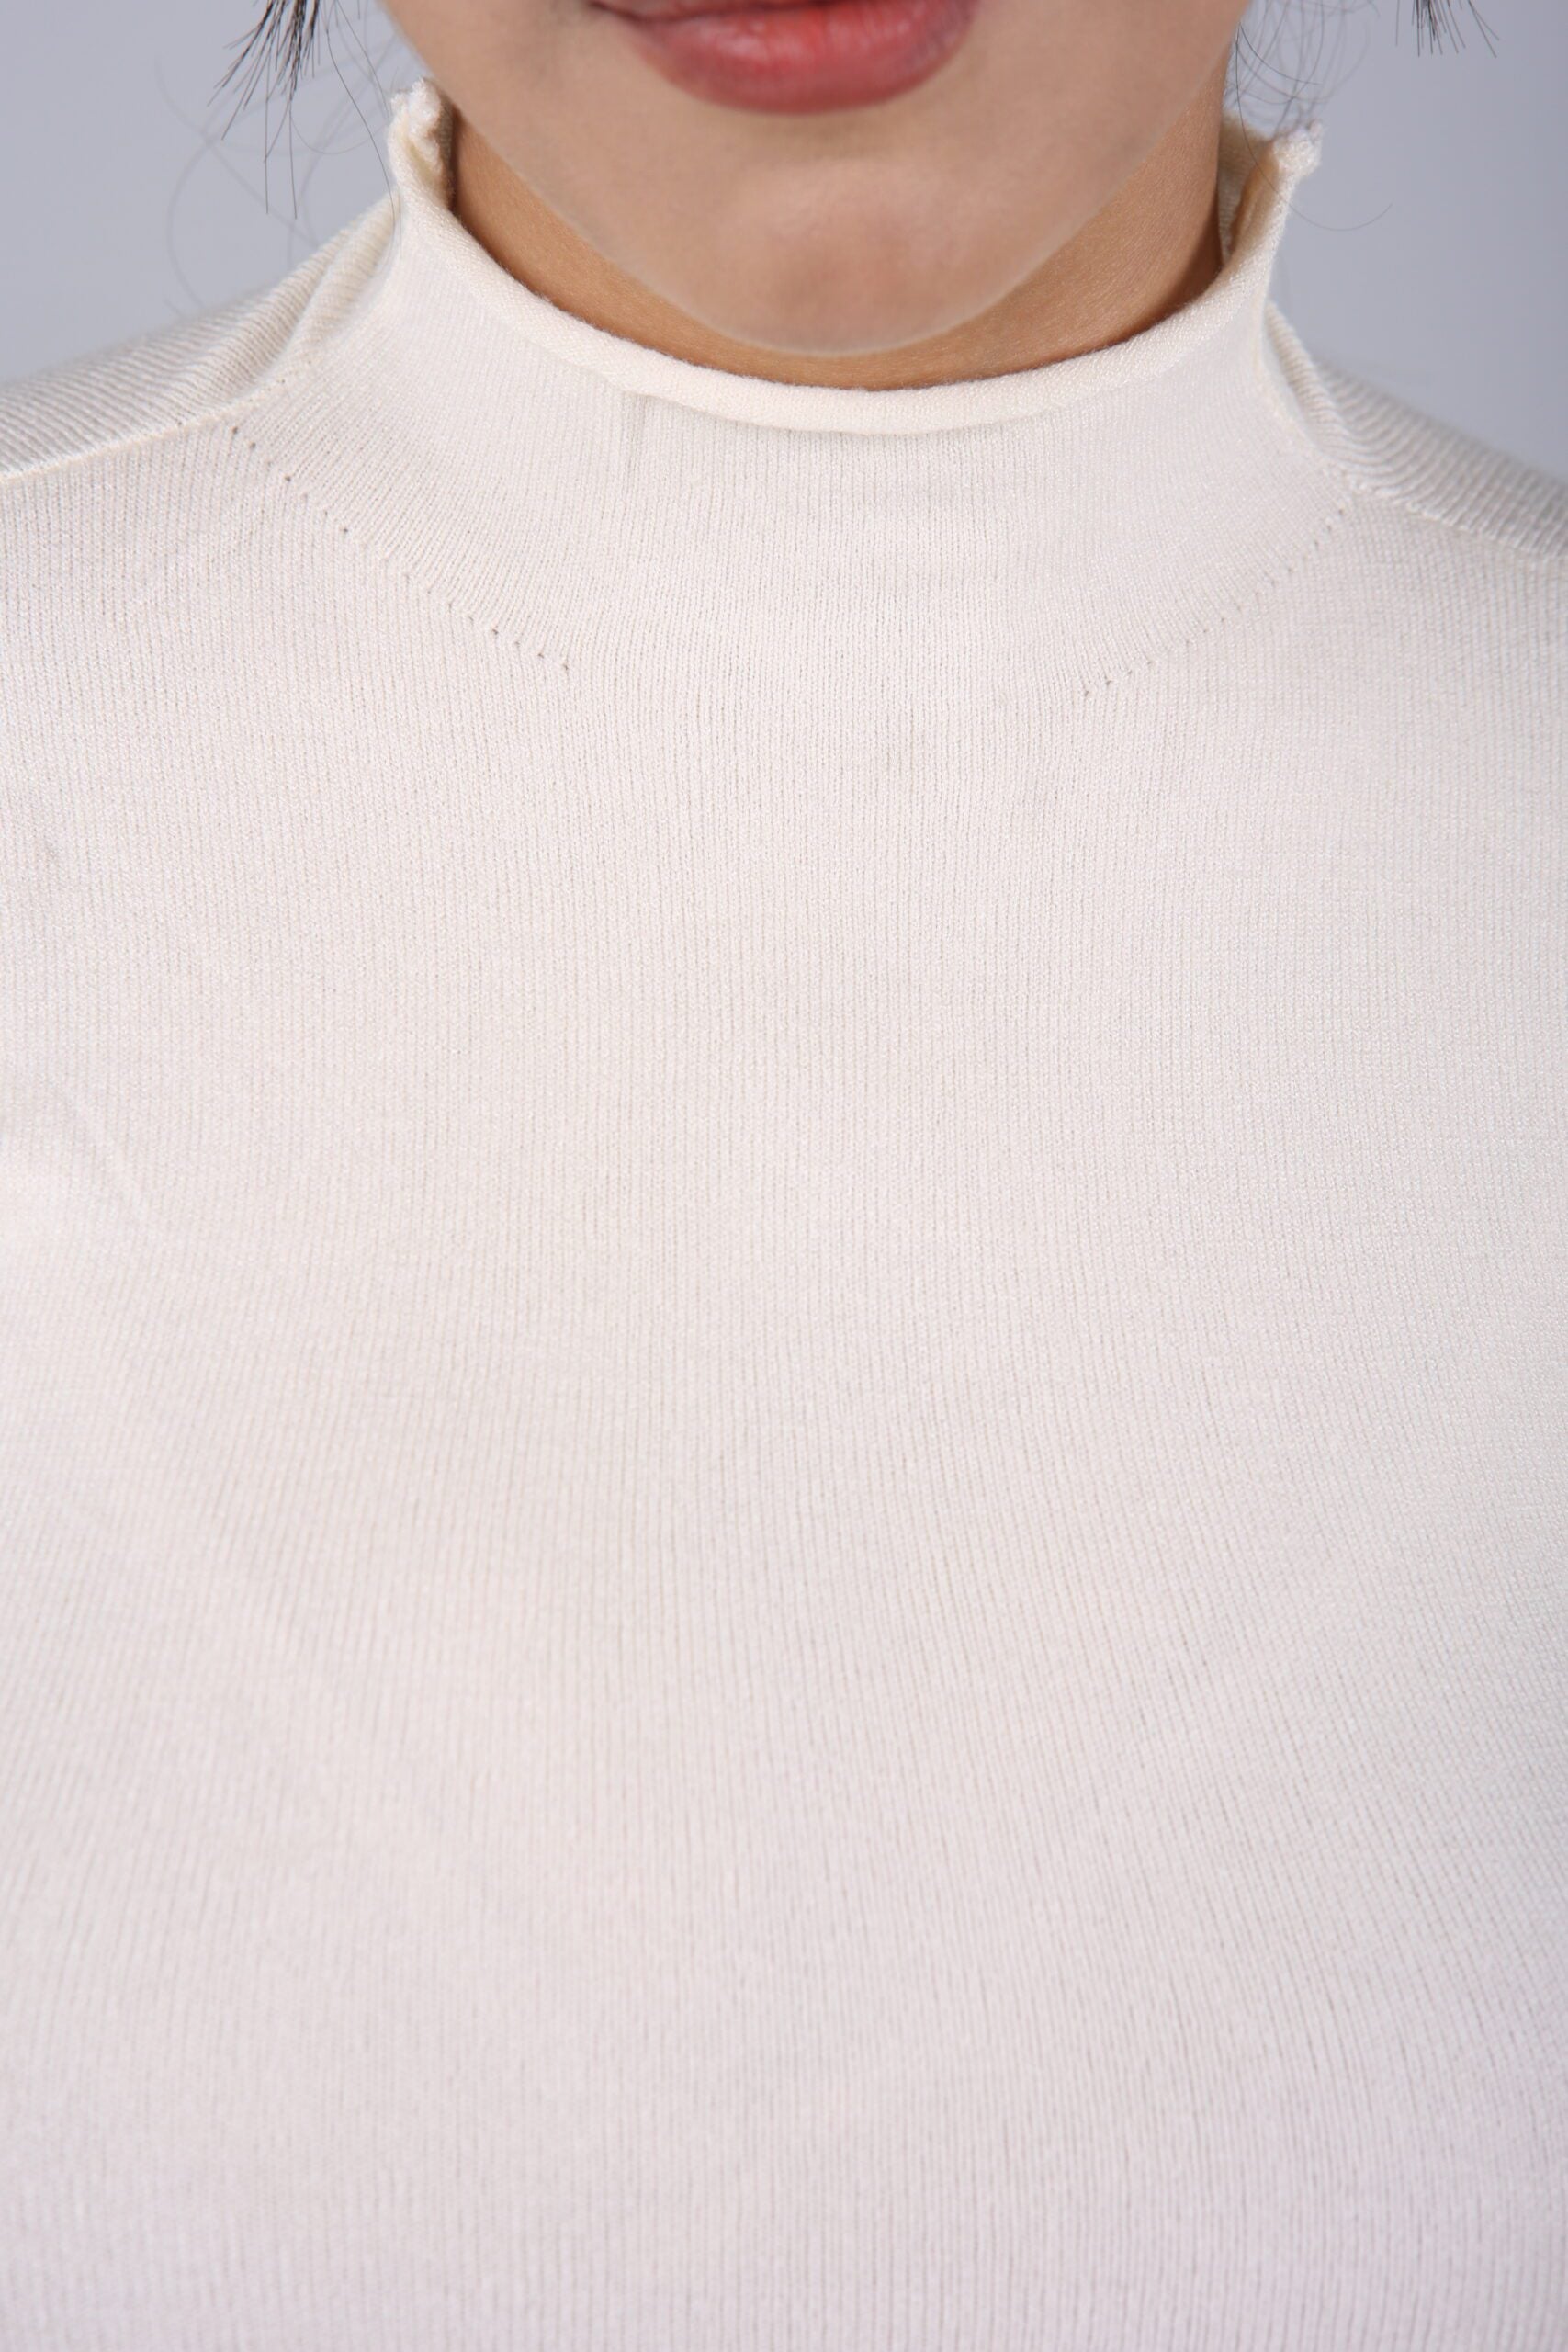 T-neck Basic Knitted Top (Off White) A Classic Wardrobe Staple for Timeless Comfort and Style!